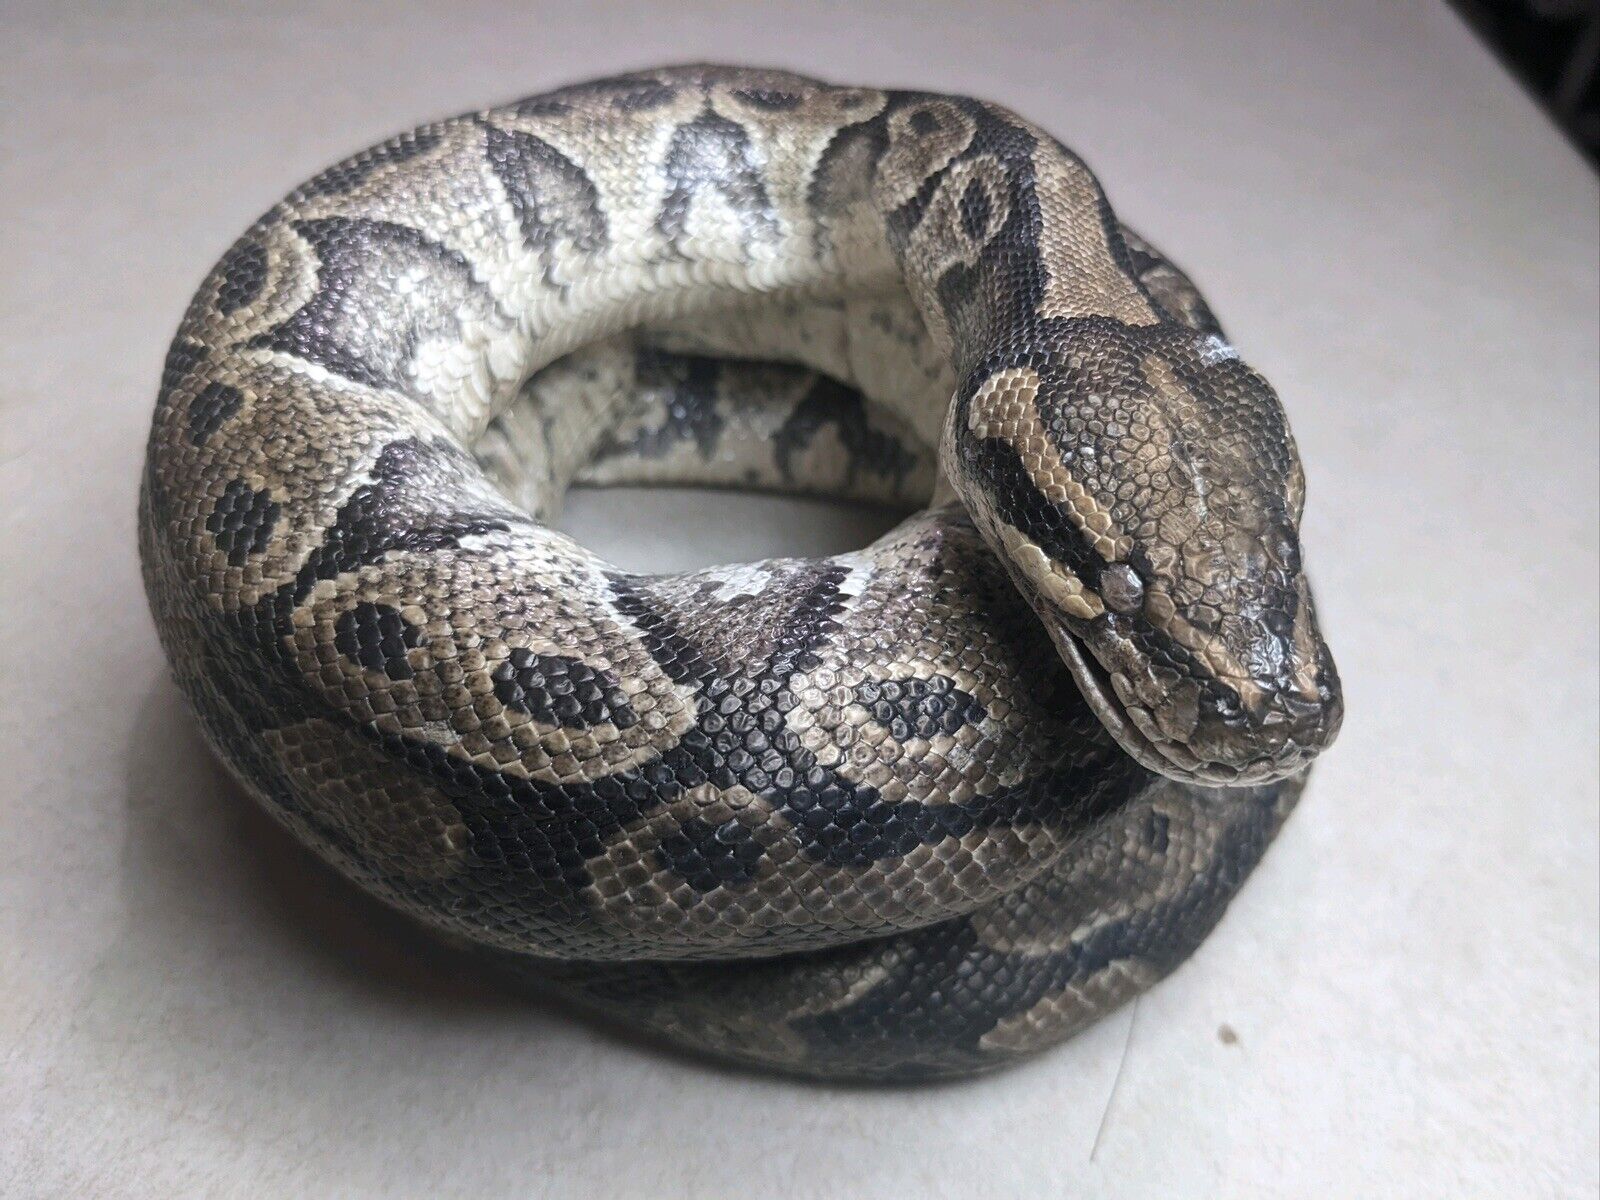 Real Massive Ball Dinker Python Taxidermy Mount